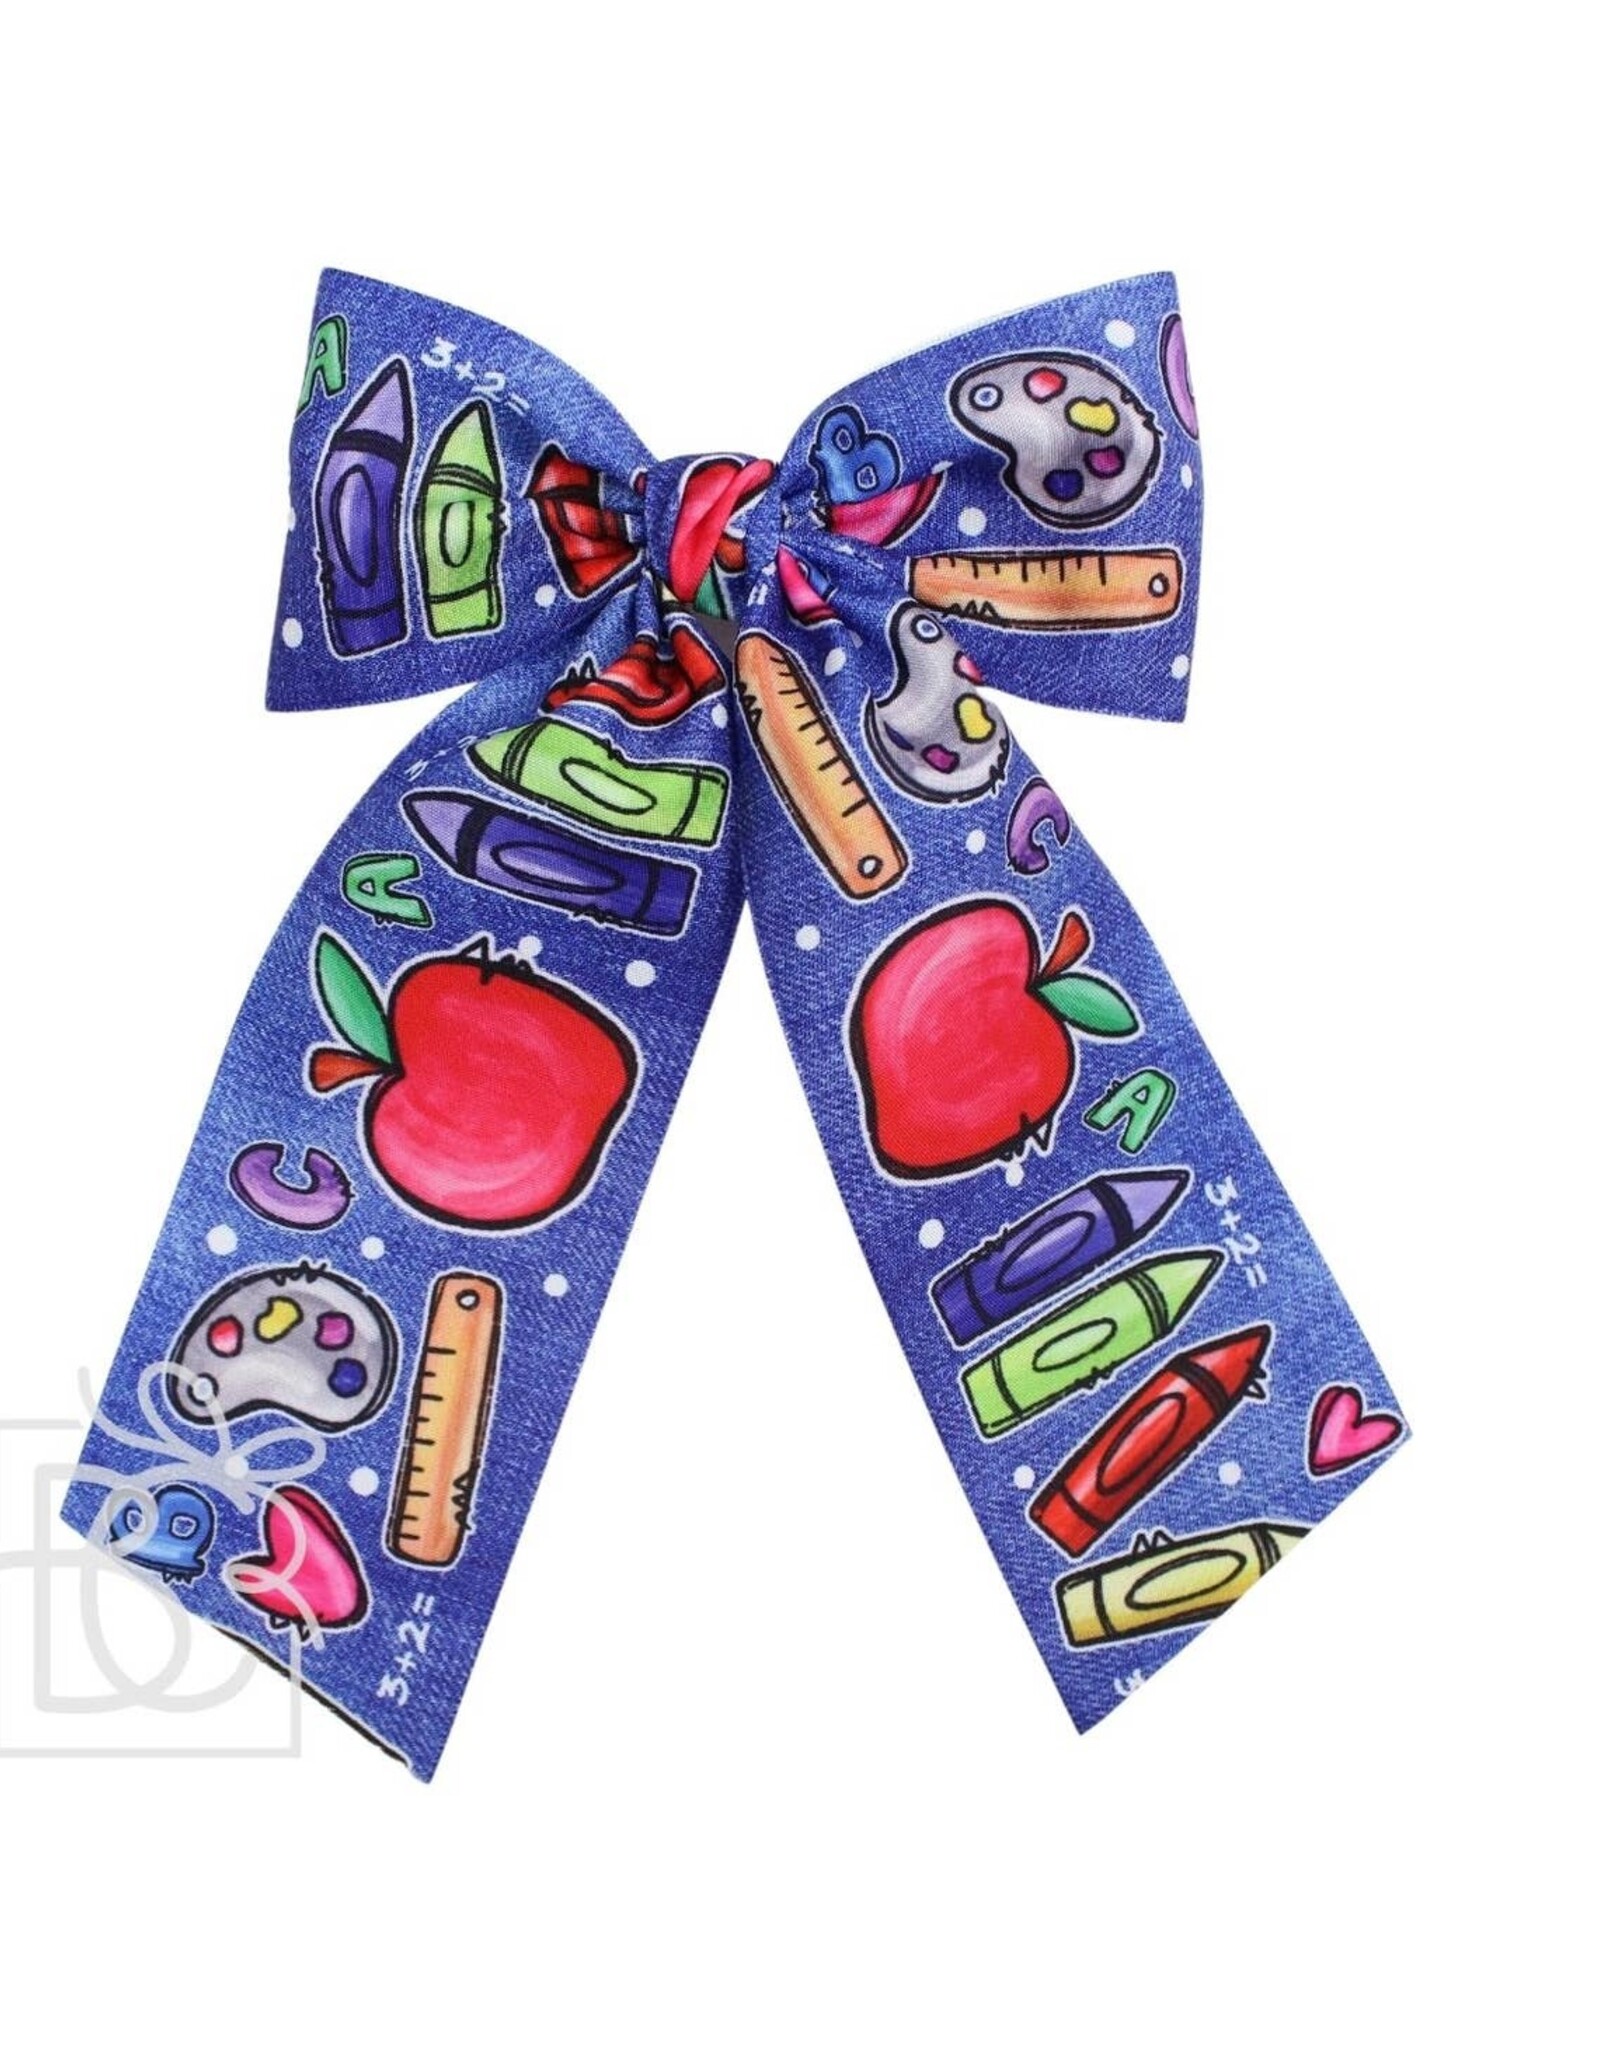 Beyond Creations Emily 4.5" School Bow